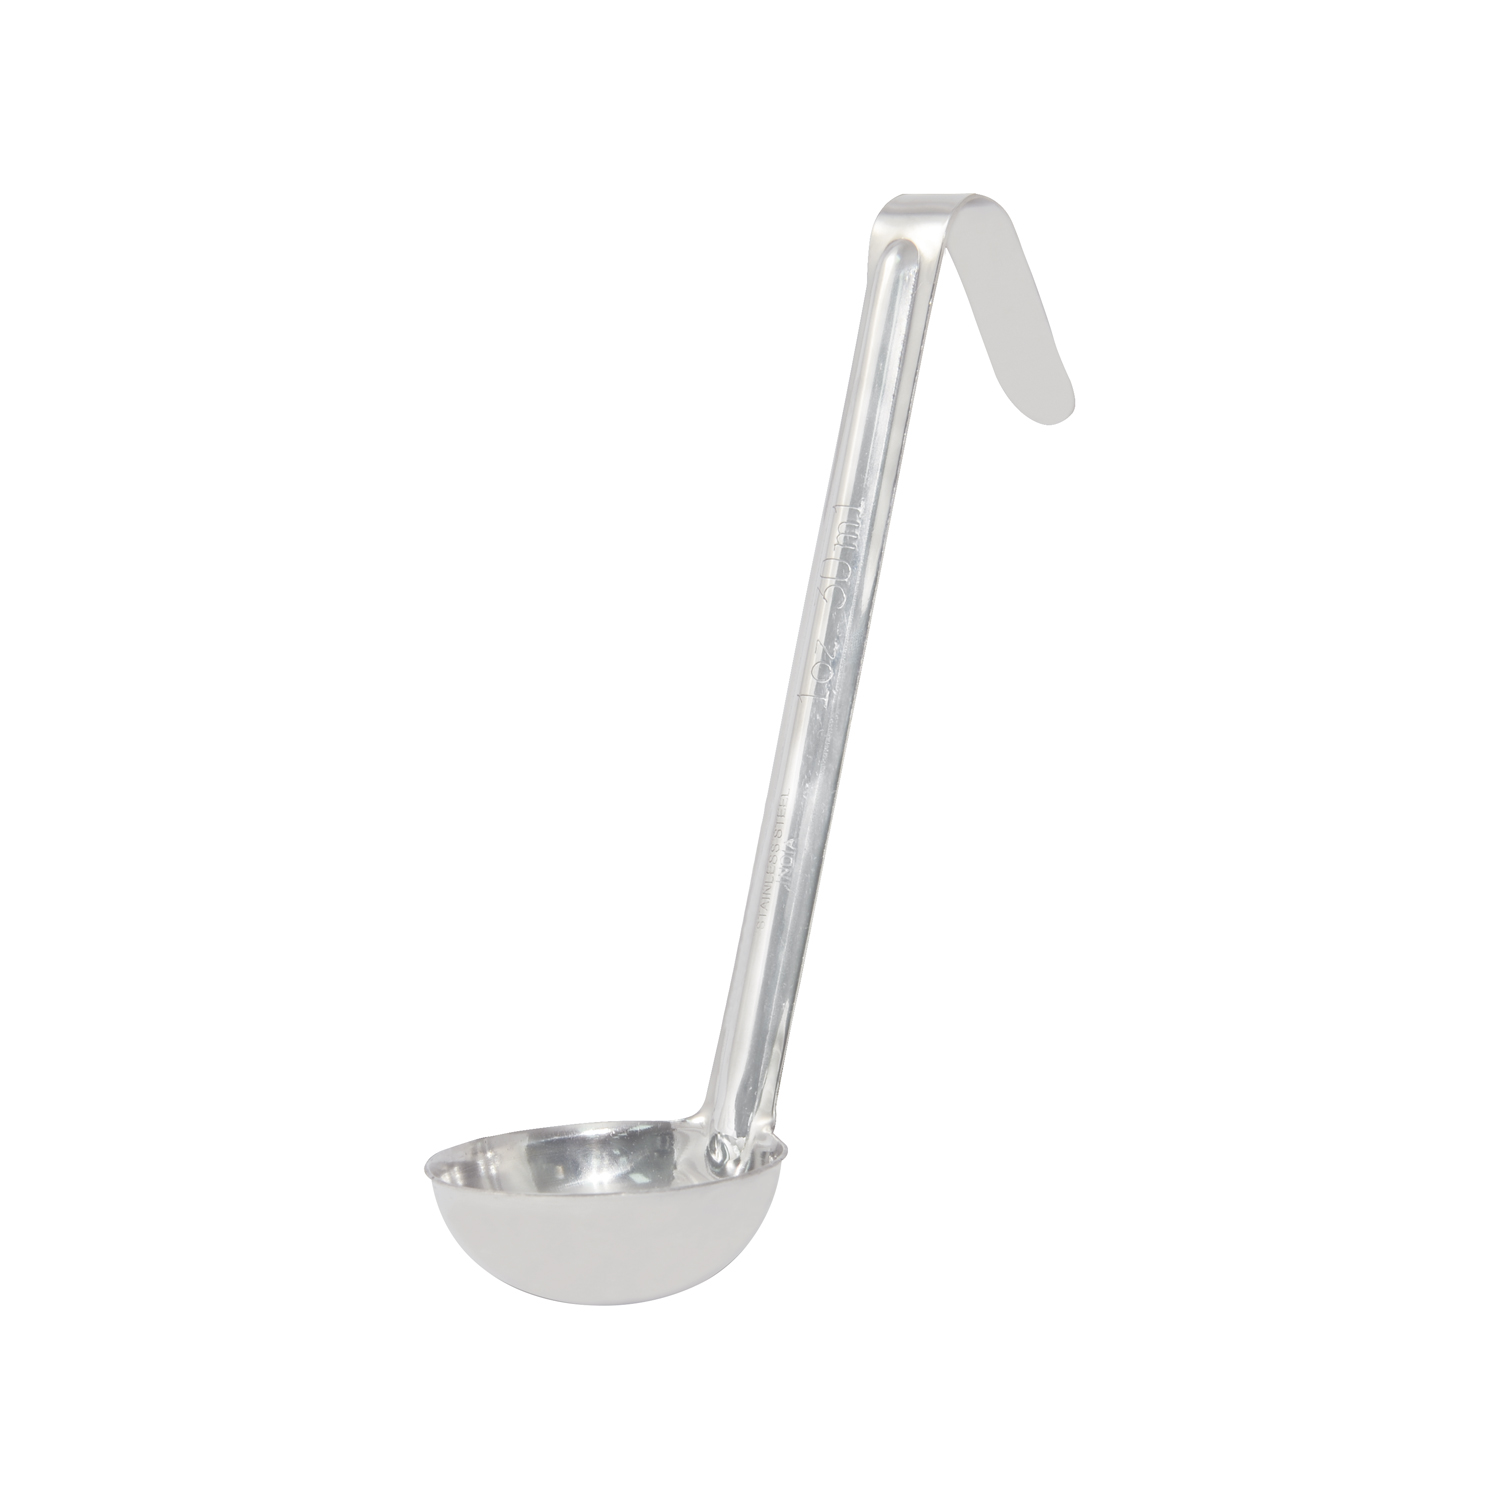 CAC China SLD6-10 One-Piece Stainless Steel Ladle with 6" Handle 1 oz.